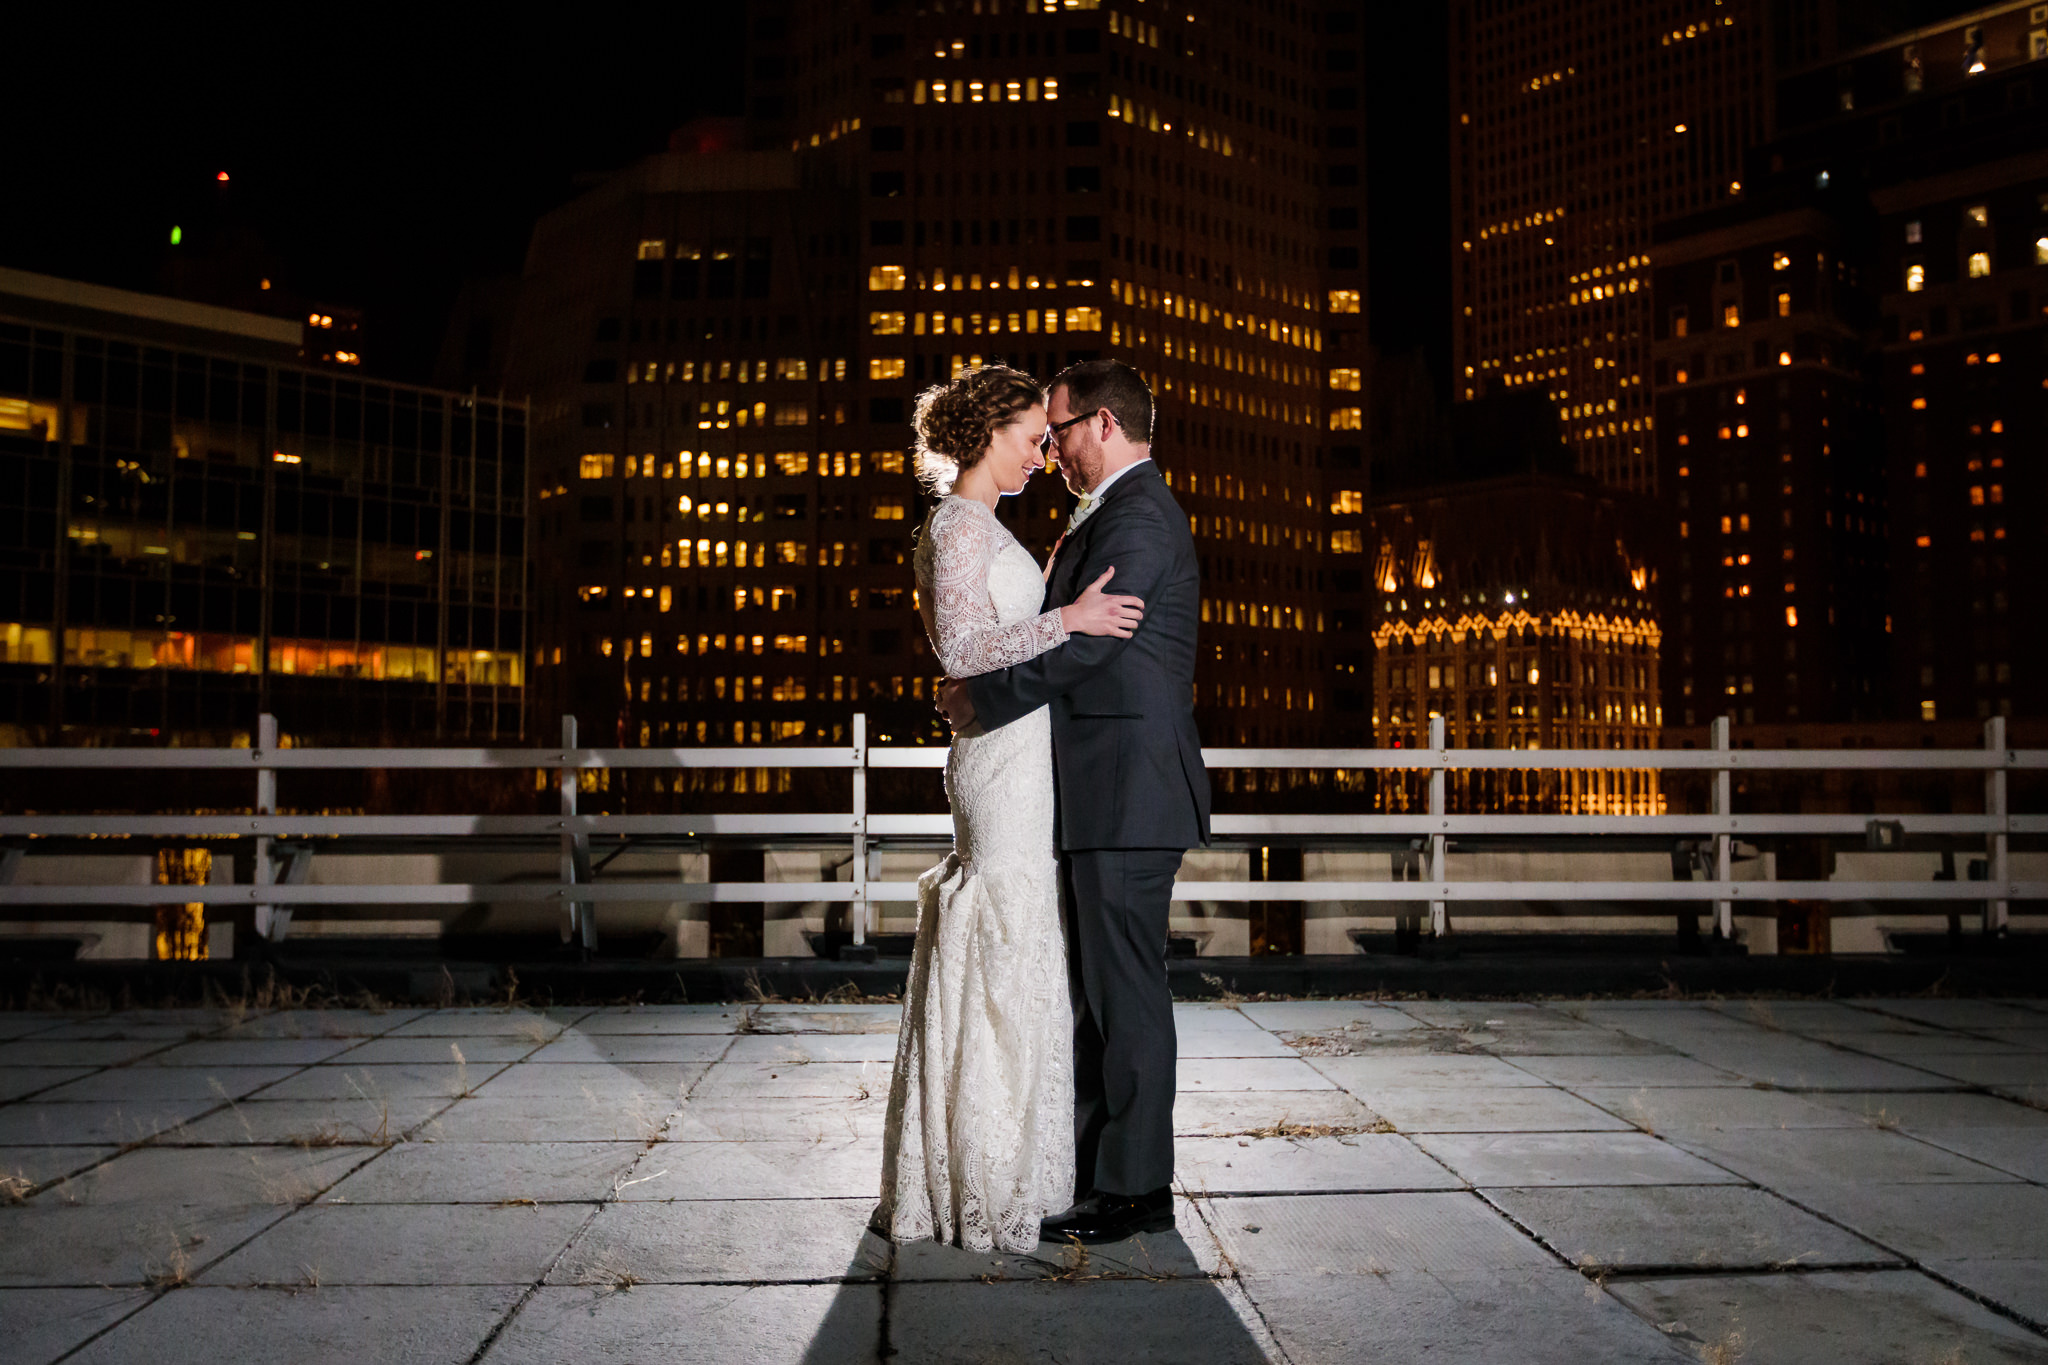 Bride & groom pose for a photo at night on the rooftop patio of the DoubleTree Pittsburgh Downtown